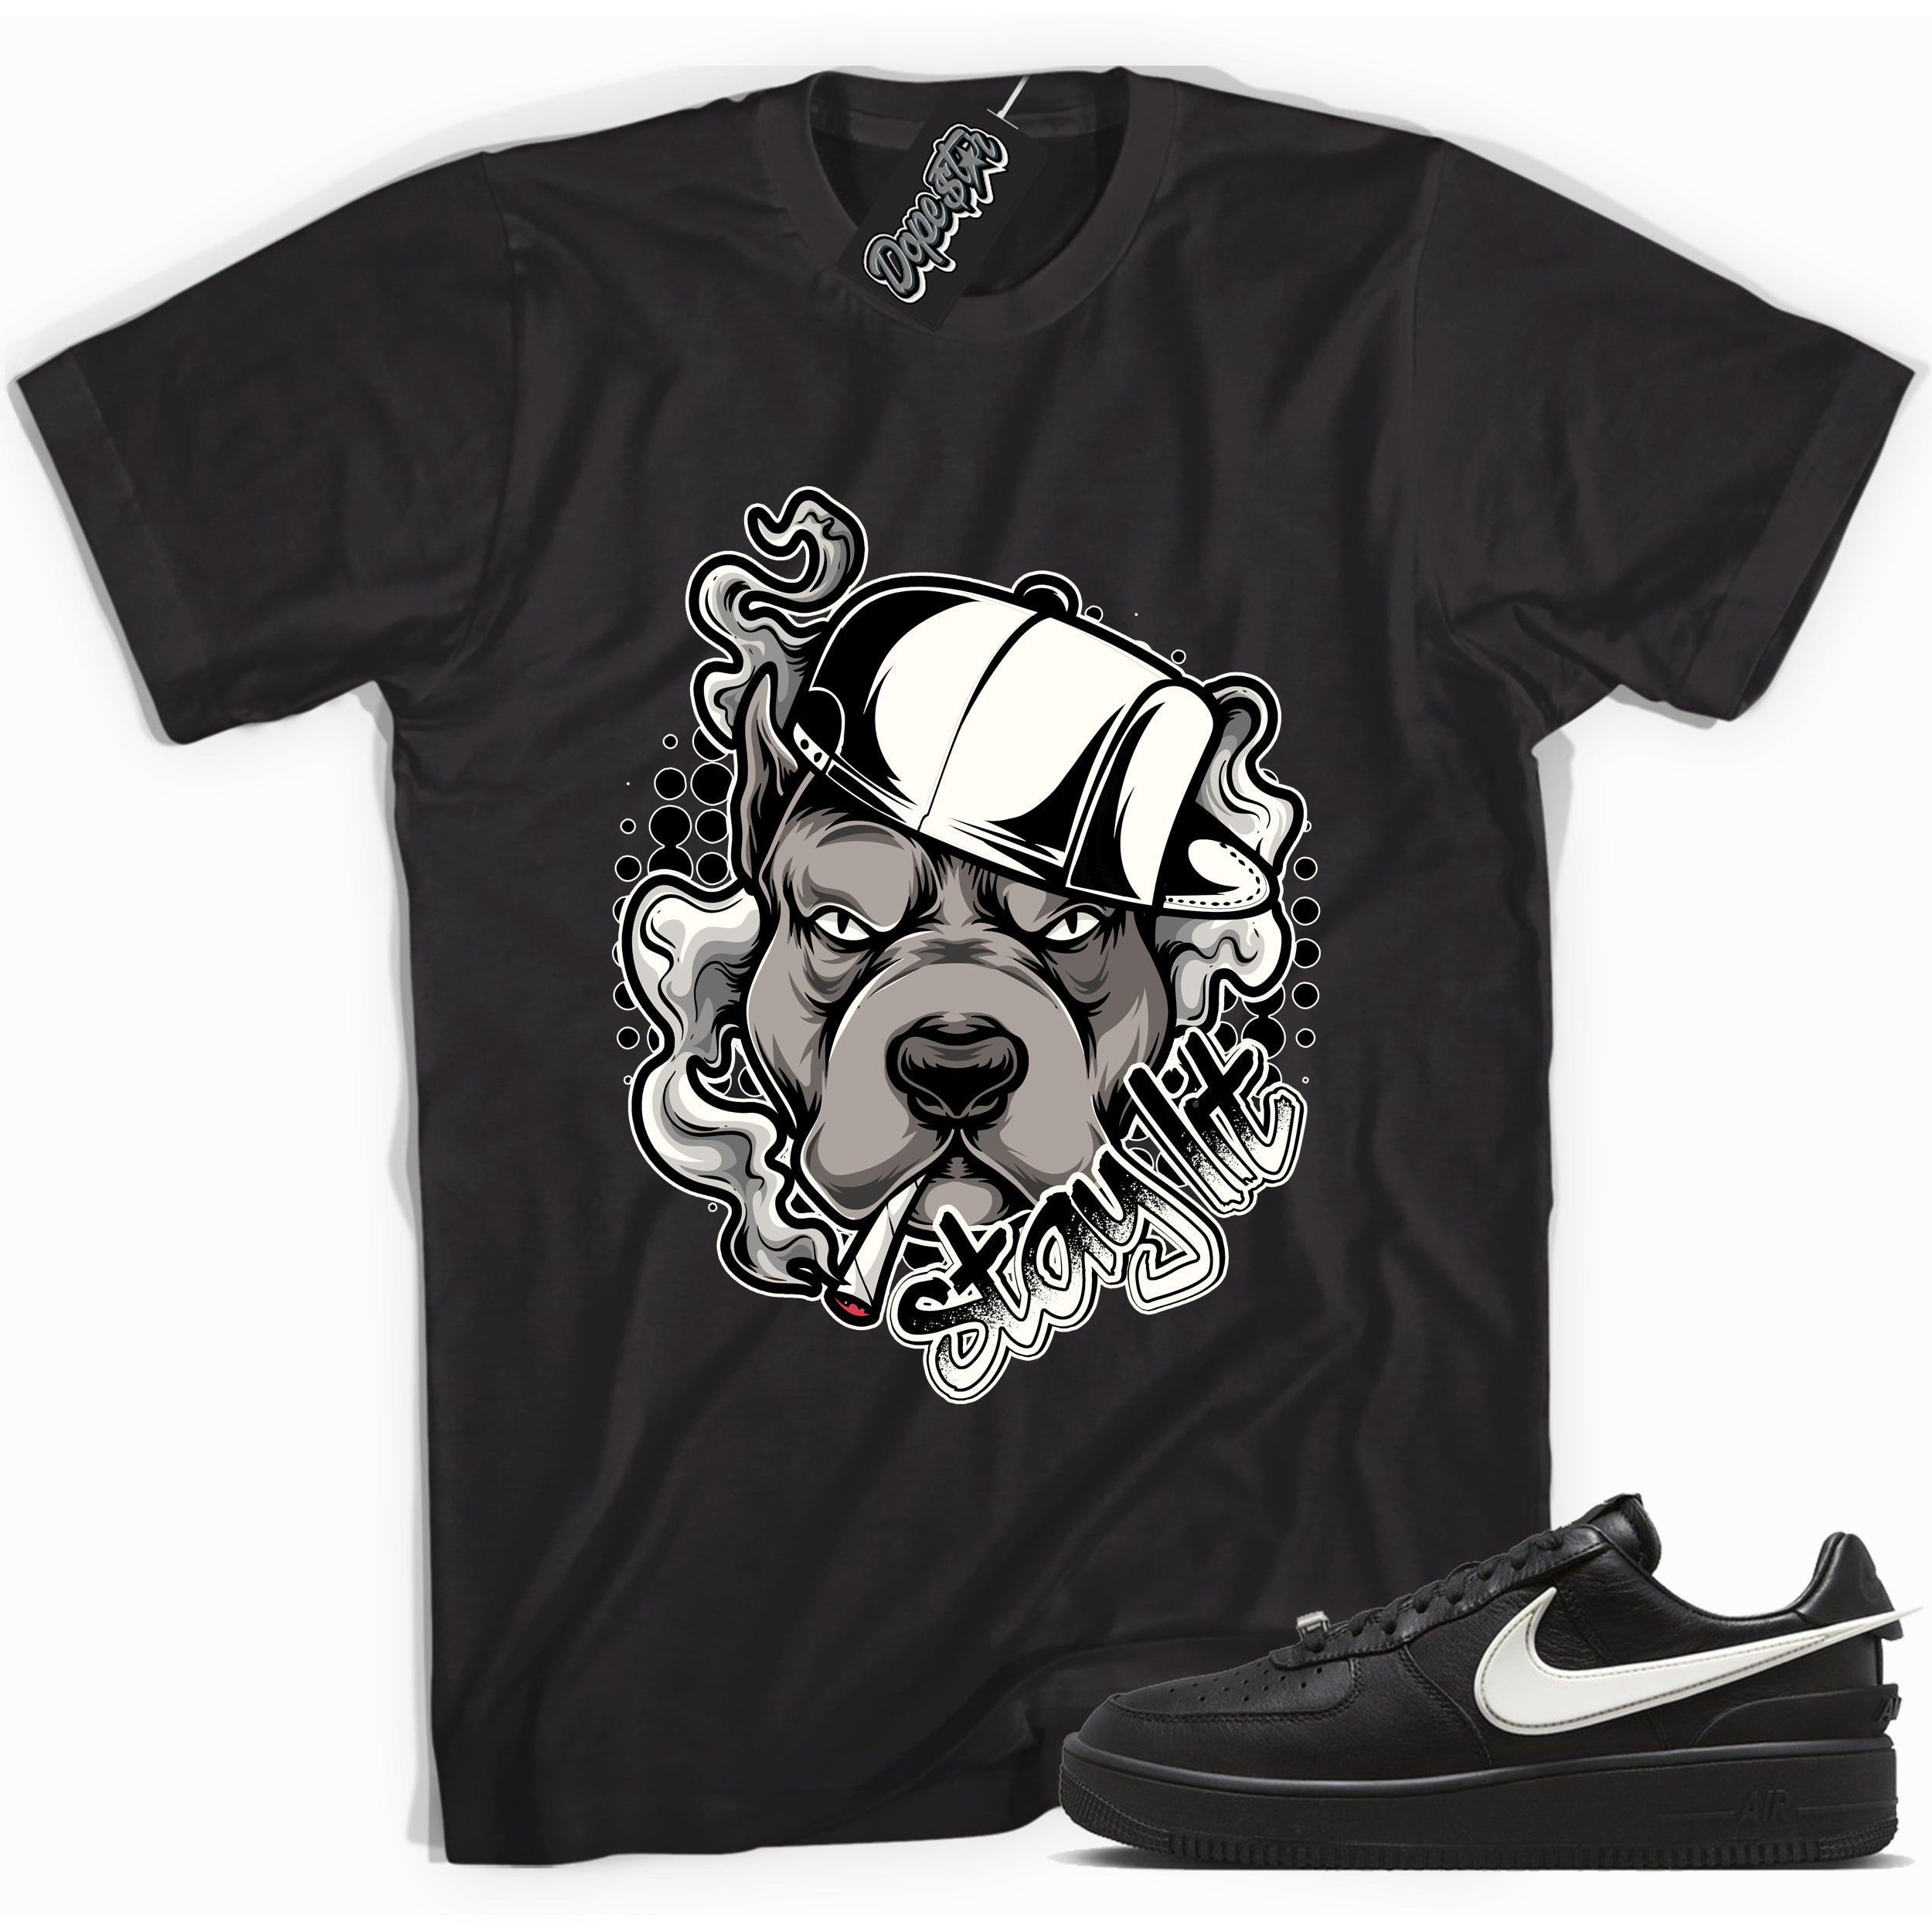 Cool black graphic tee with 'stay lit' print, that perfectly matches Nike Air Force 1 Low SP Ambush Phantom sneakers.